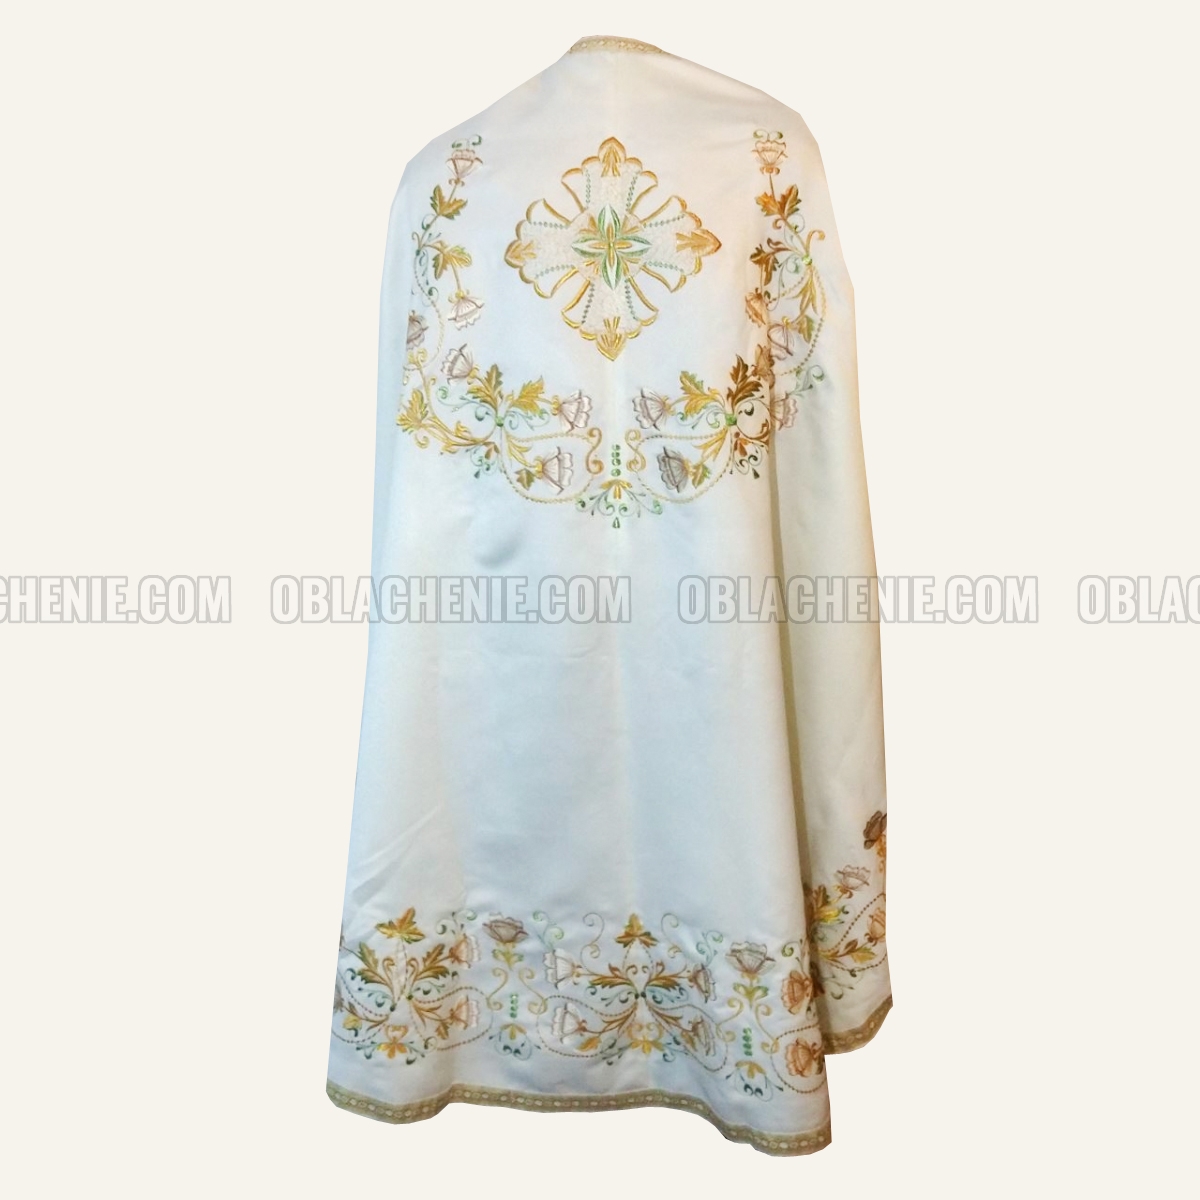 Embroidered priest's vestments 10250